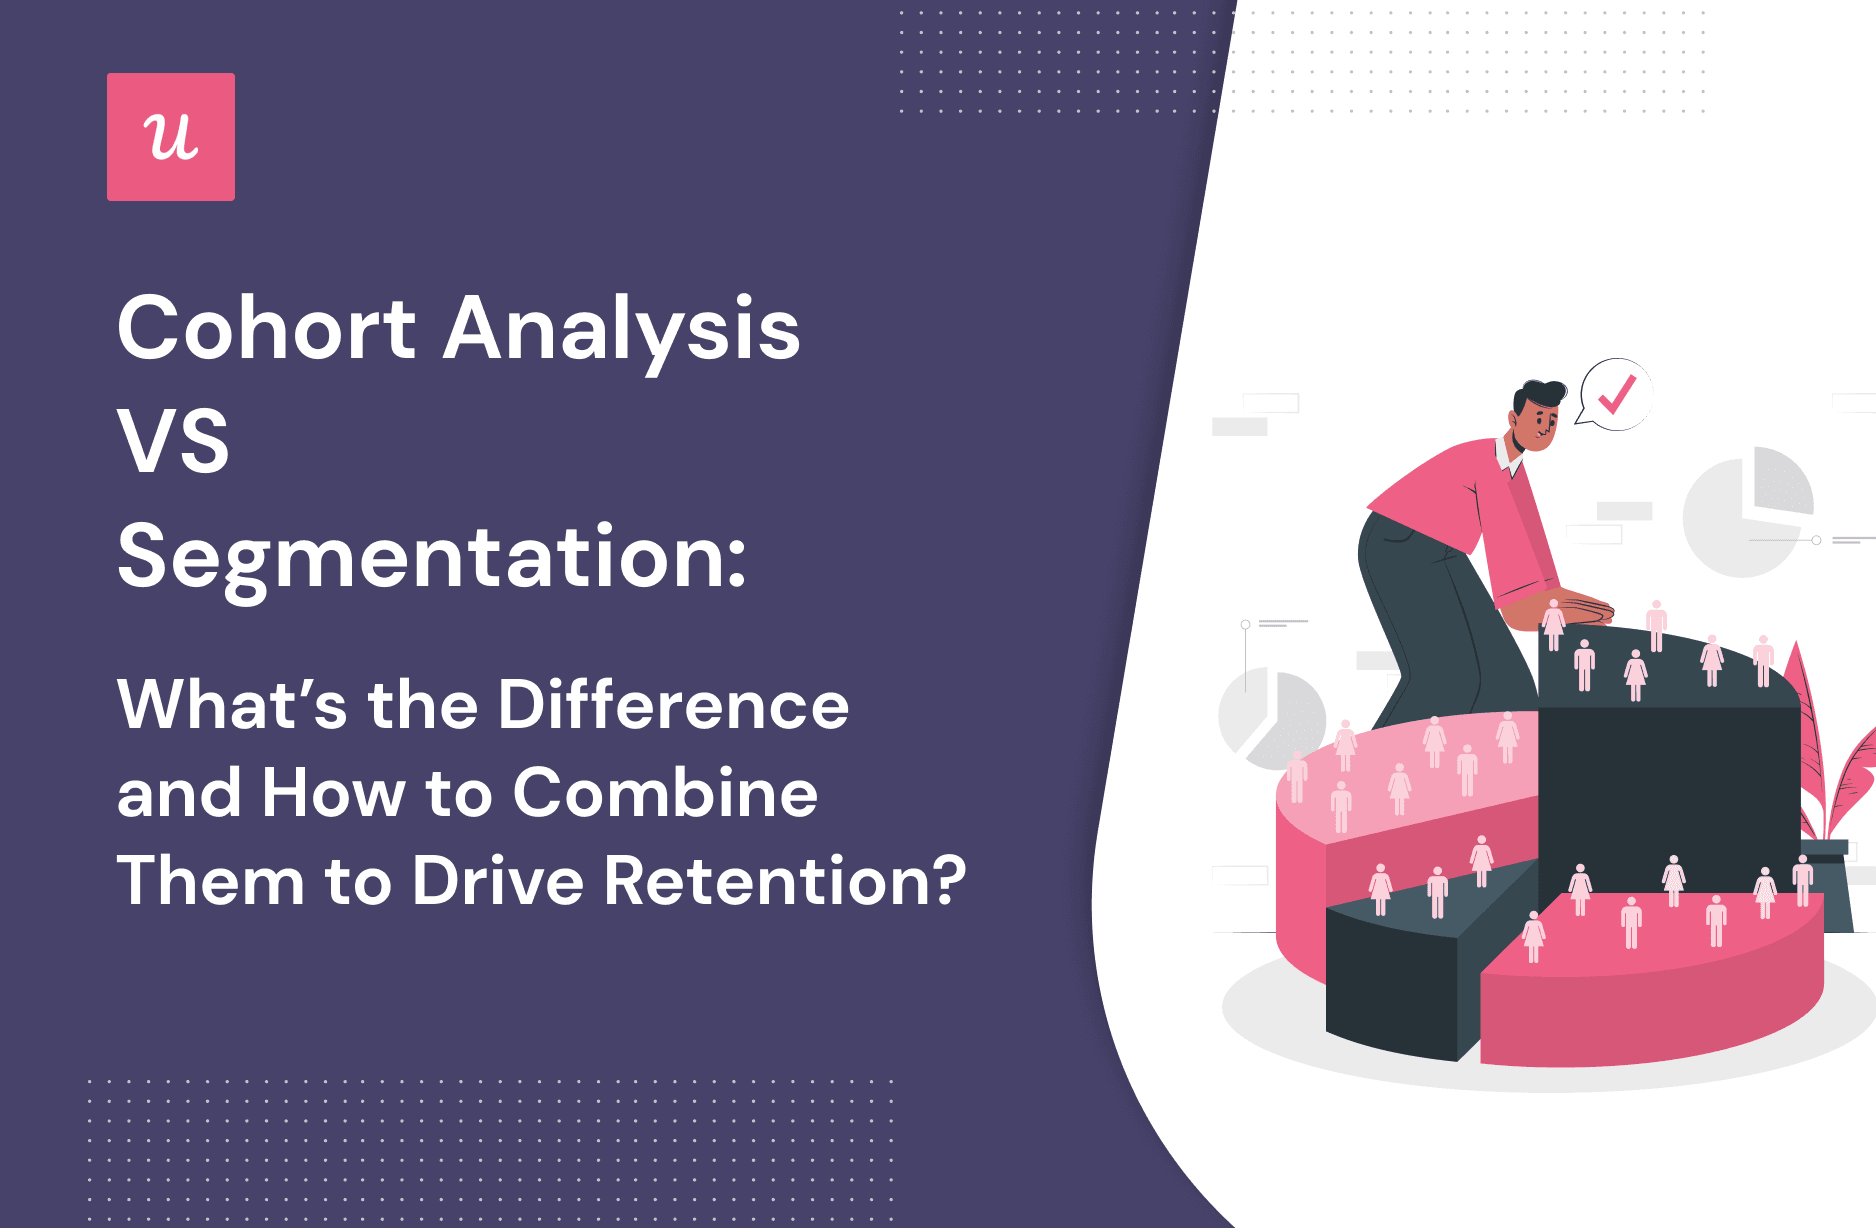 Cohort-Analysis-vs-Segmentatio-whats-the-difference-and-how-to-combine-them-to-drive-retention